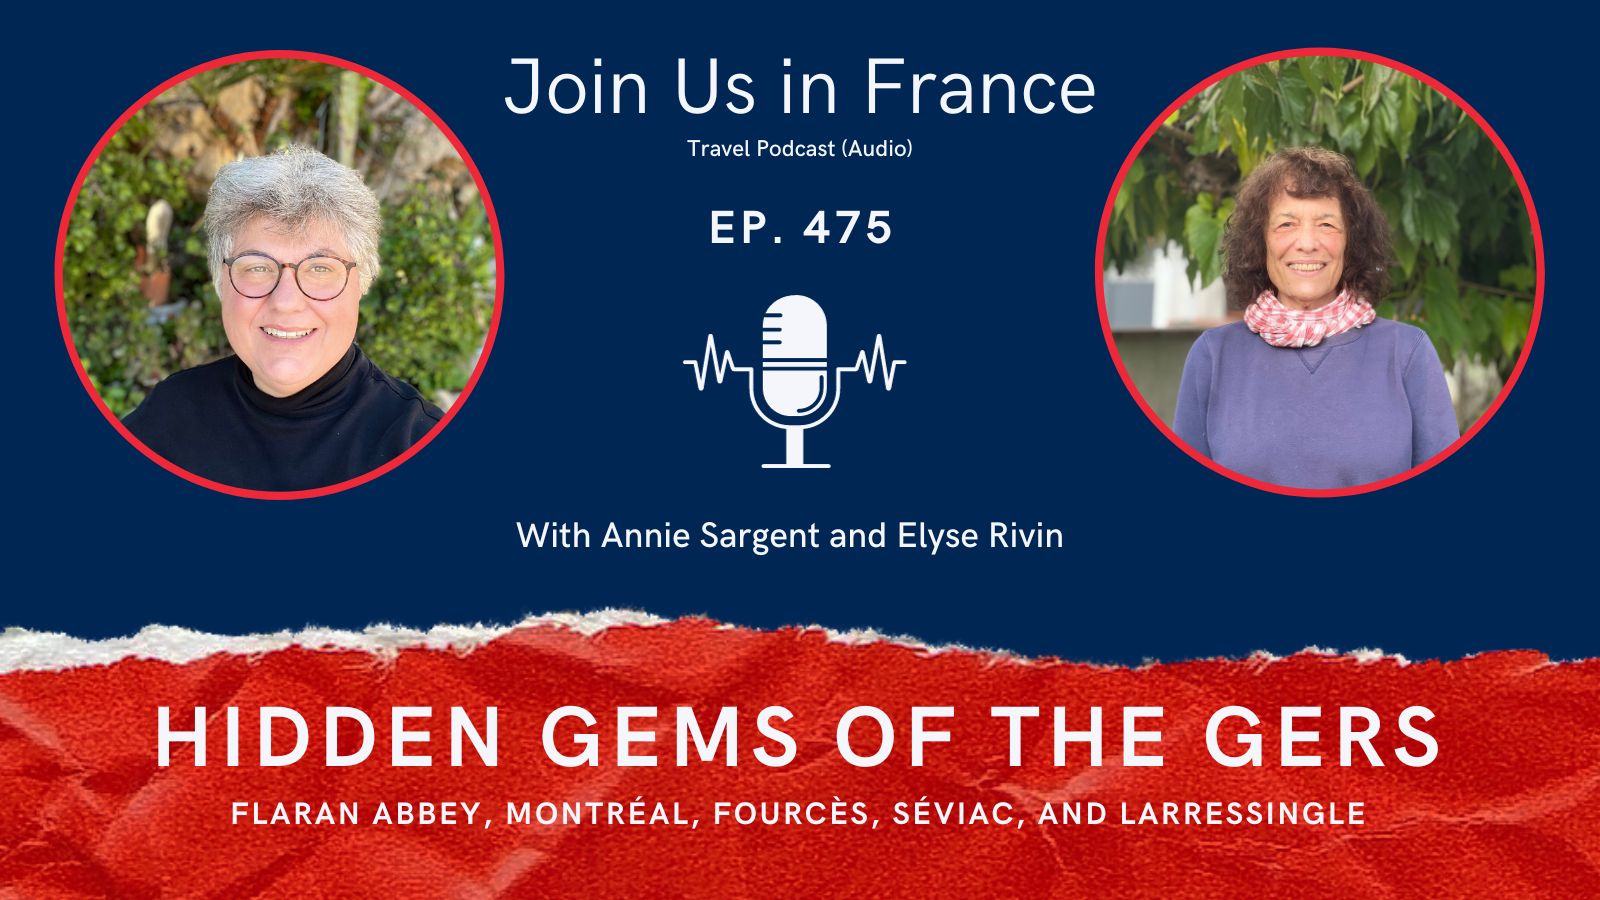 Annie Sargent and Elyse Rivin: Hidden Gems of the Gers episode